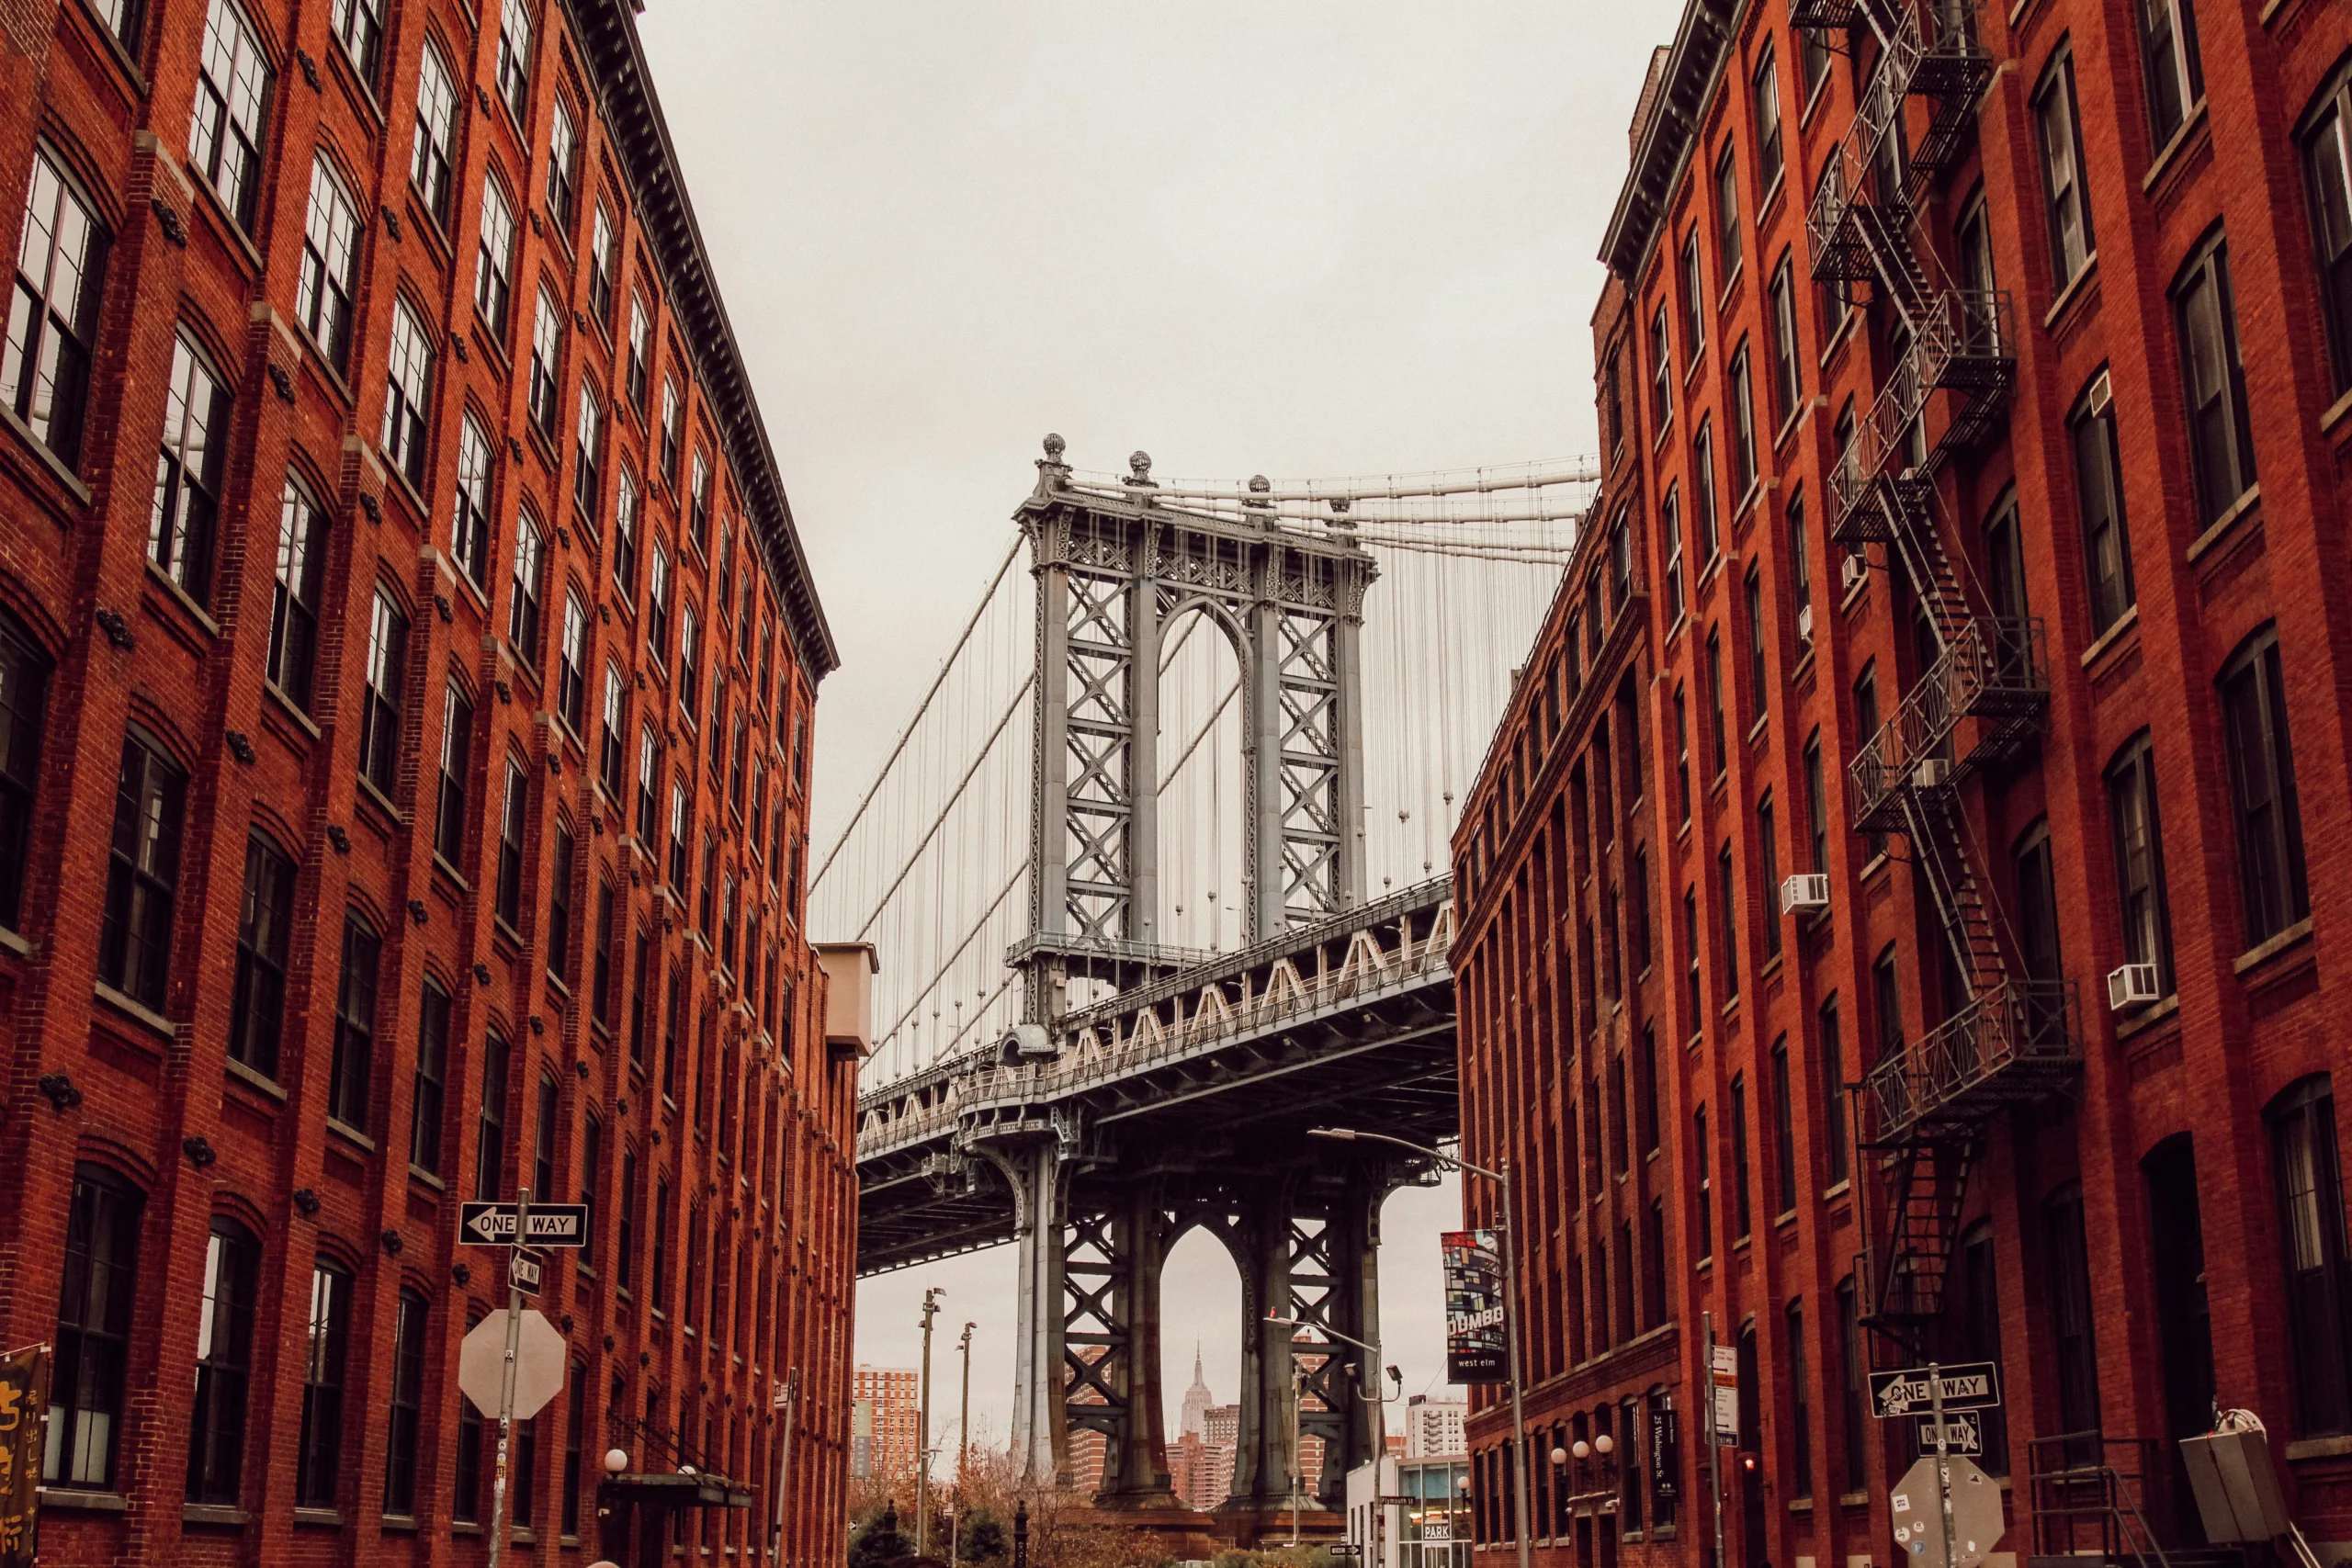 A photograph of Brooklyn bridge at the end of a street of red brick buildings against a grey sky